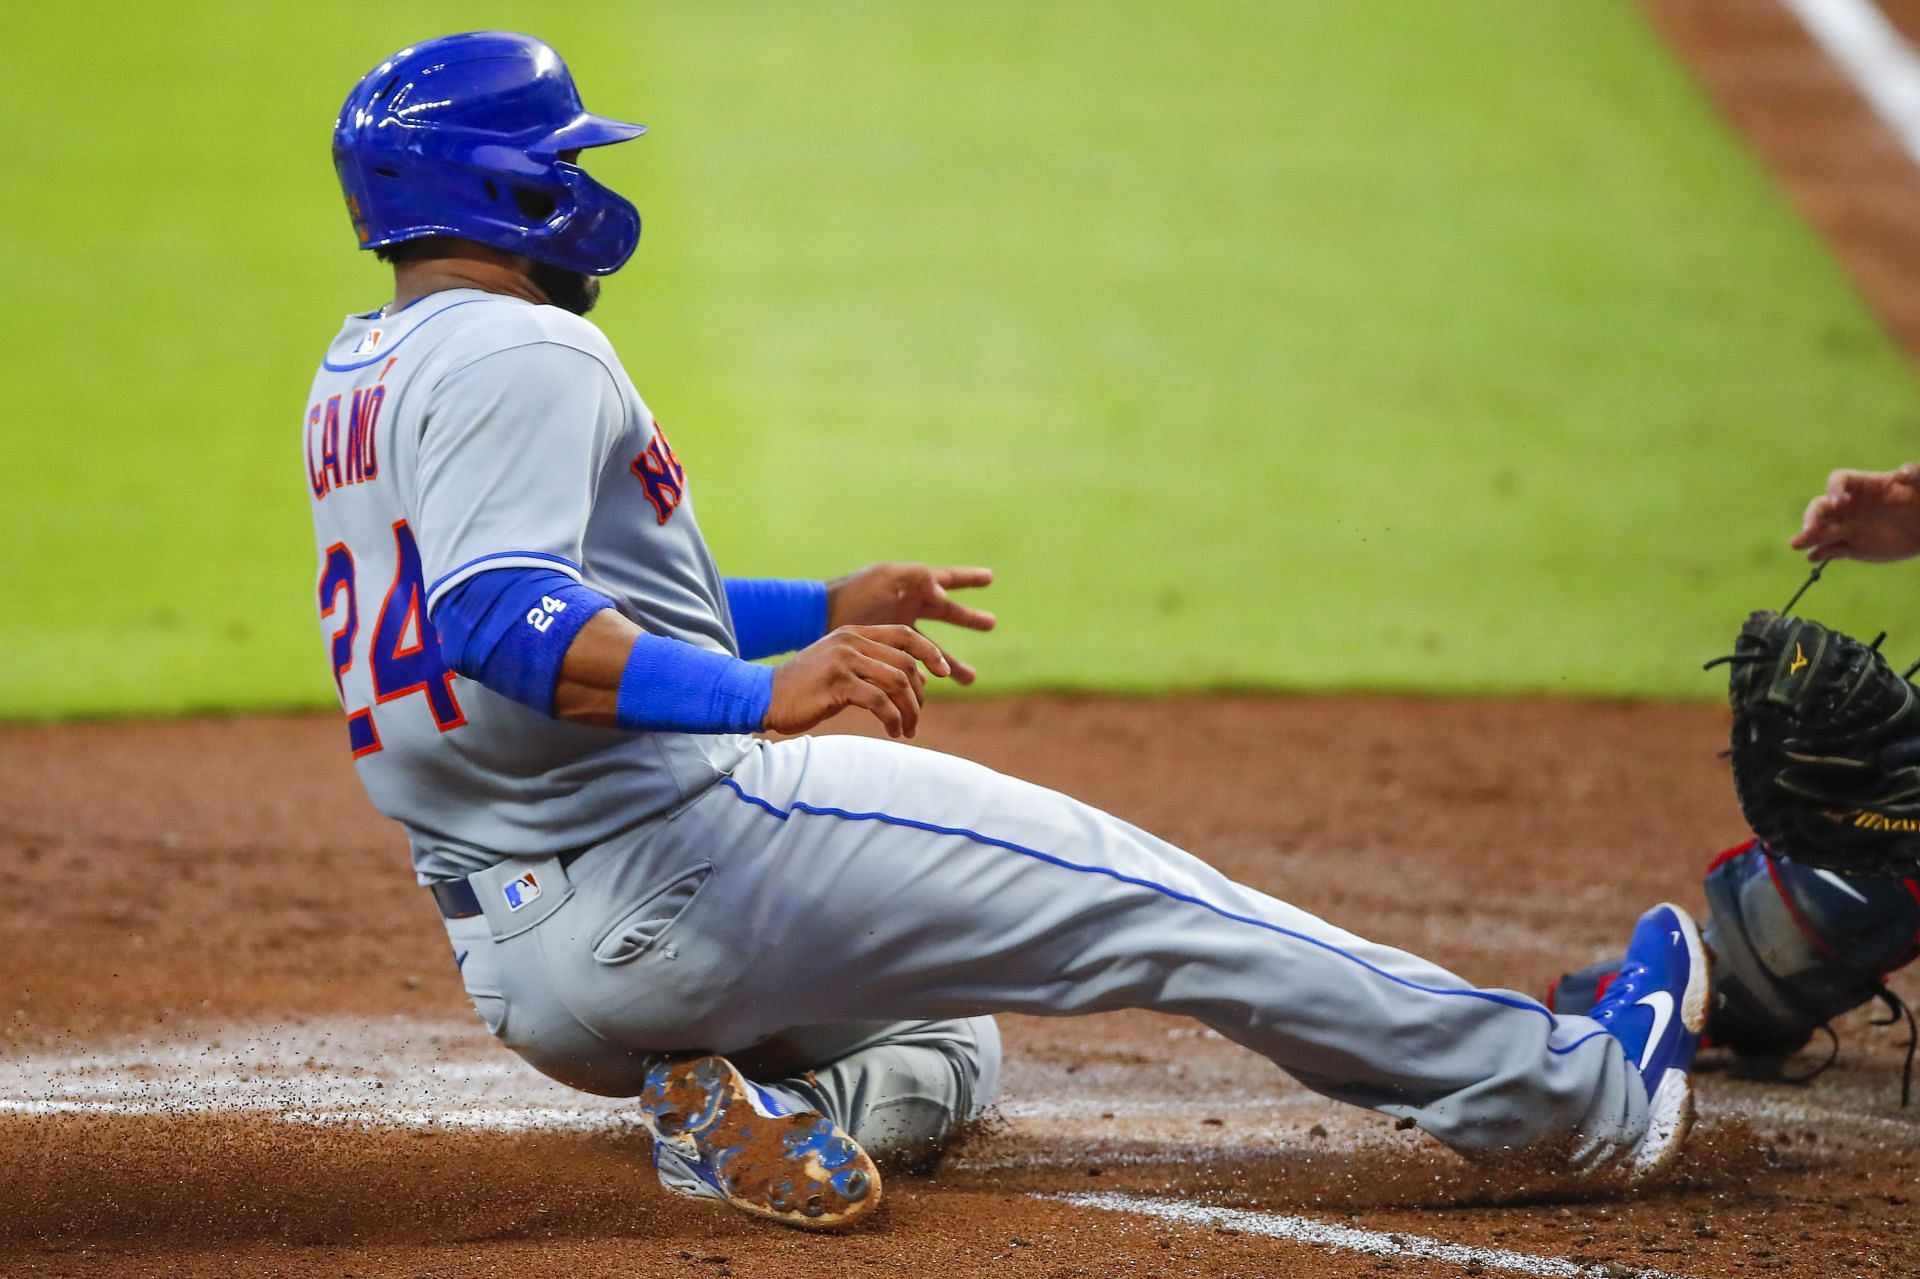 Robinson Cano Apologizes to Mets for Steroids Suspension - The New